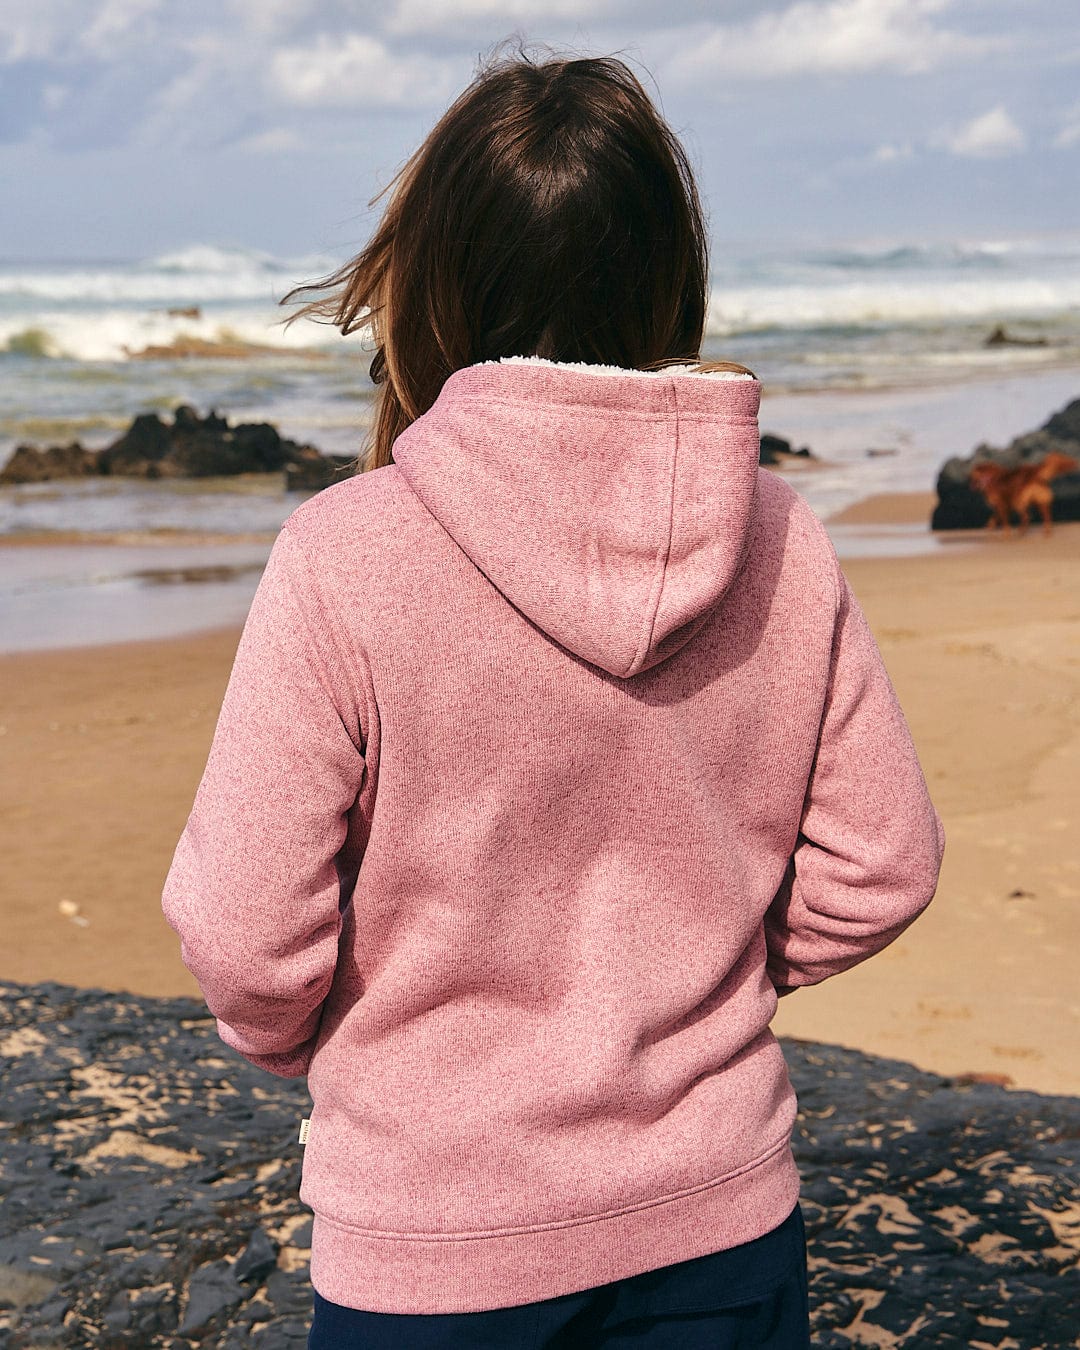 A woman wearing the Galak - Womens Fur Lined Hoody - Mid Pink by Saltrock standing on the beach.